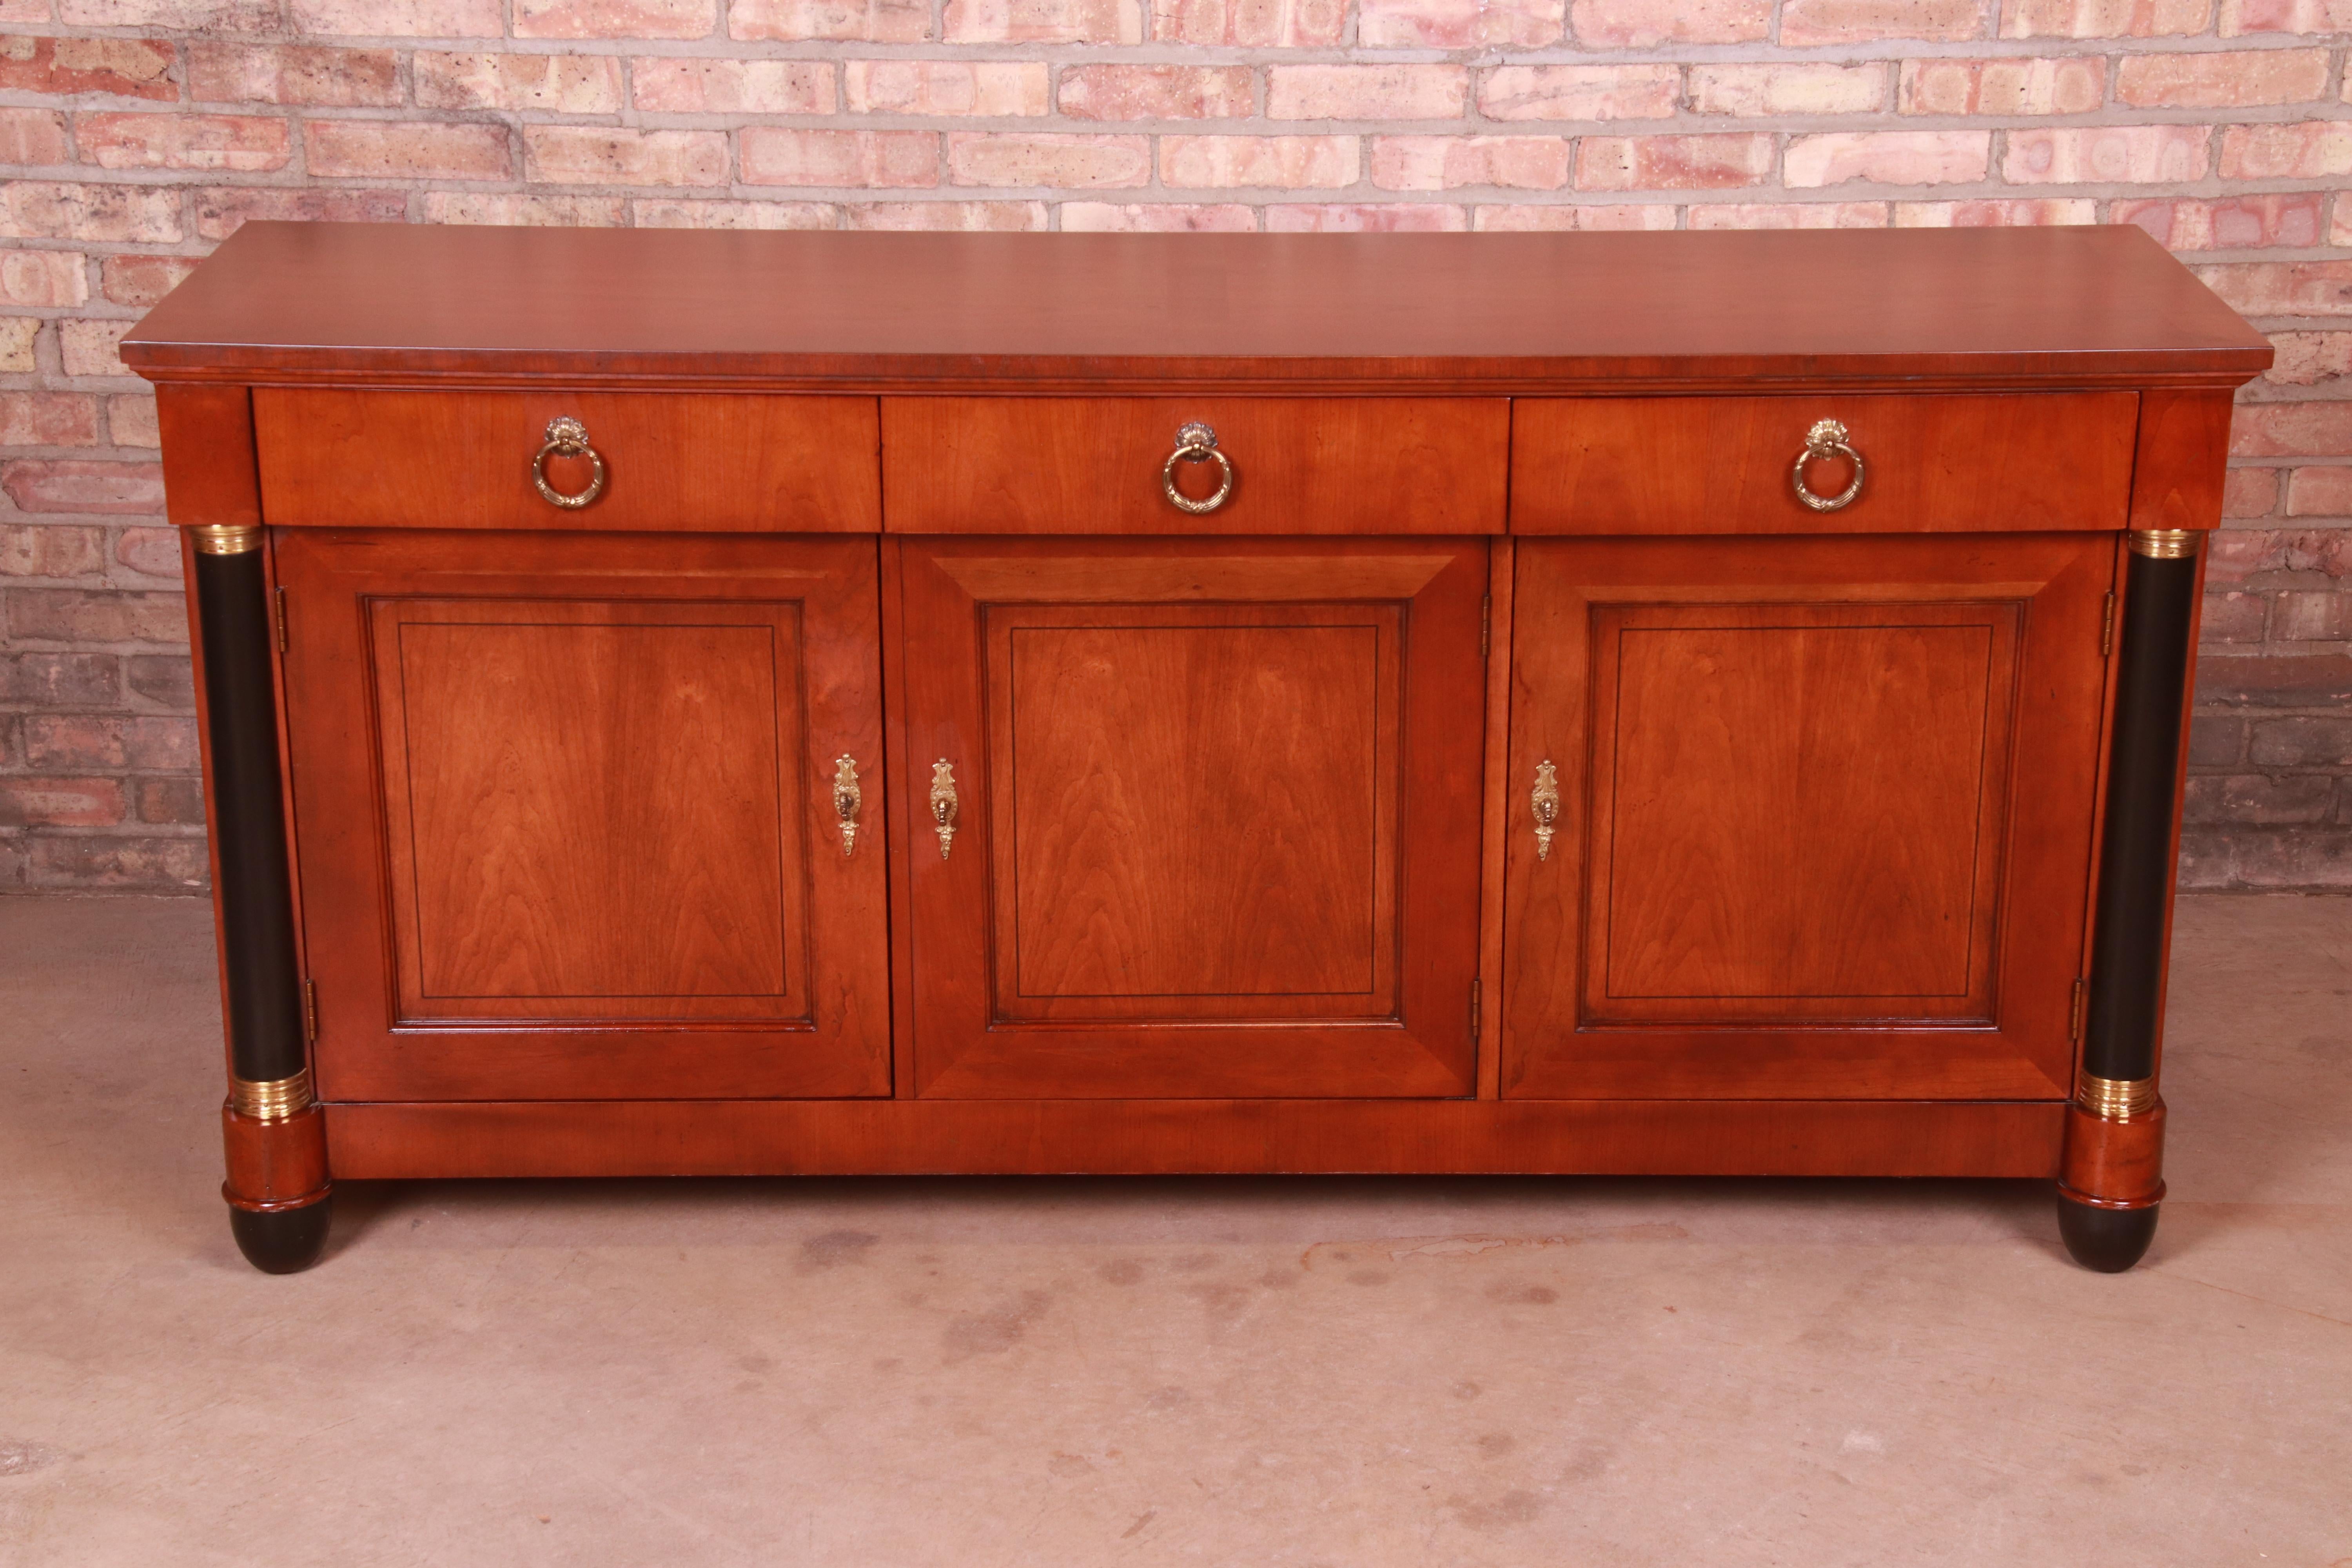 An exceptional neoclassical sideboard, credenza, or bar cabinet

By Baker Furniture 